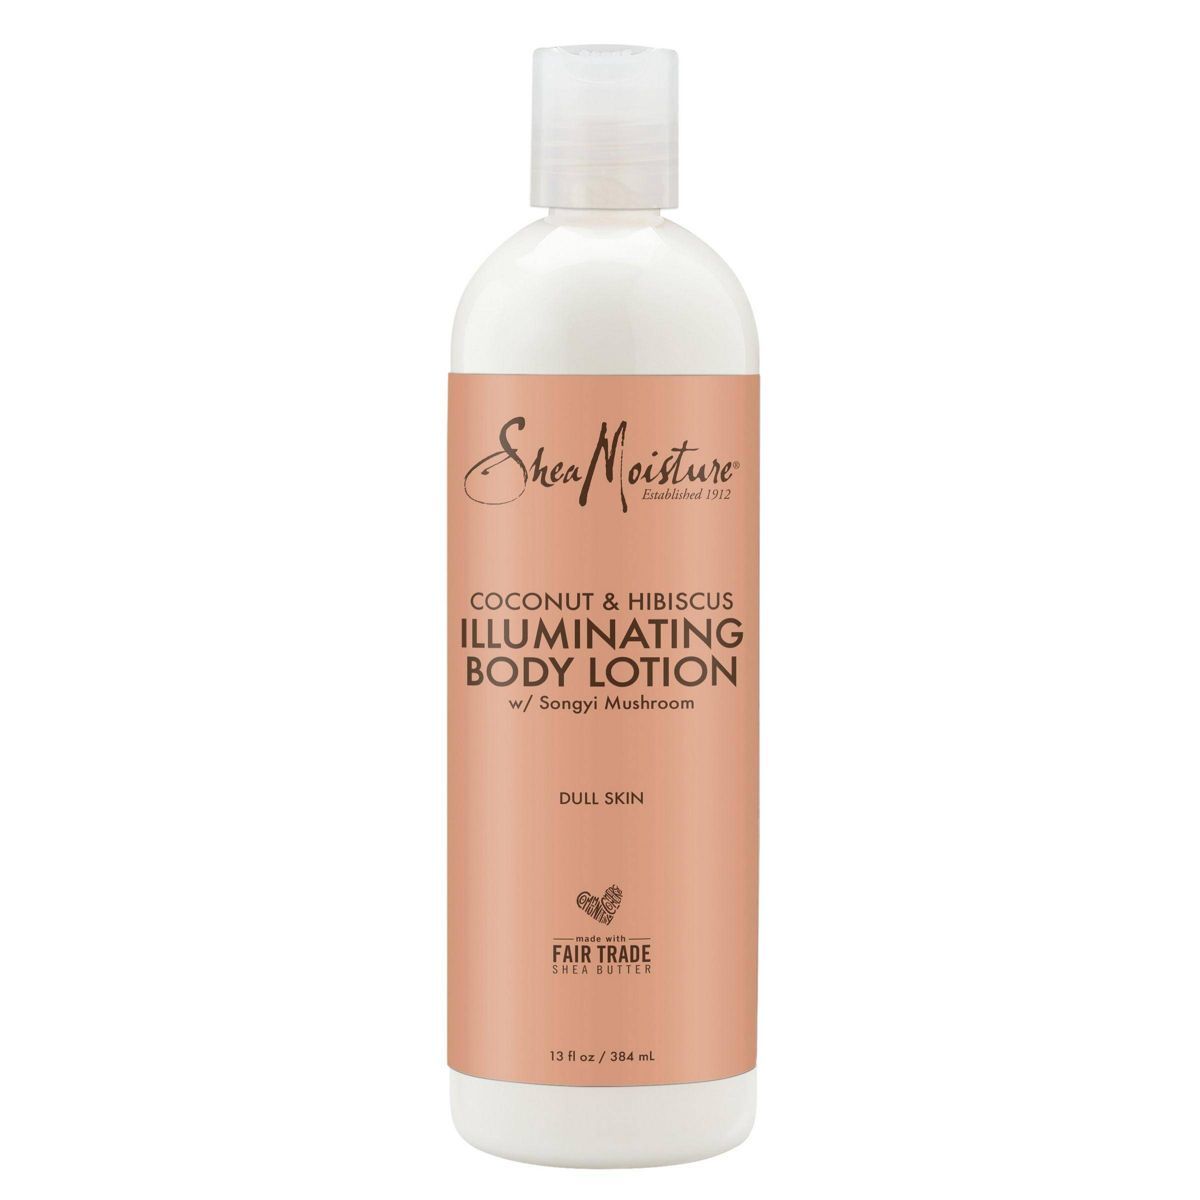 SheaMoisture Coconut & Hibiscus Illuminating Body Lotion for Dull Skin | Target